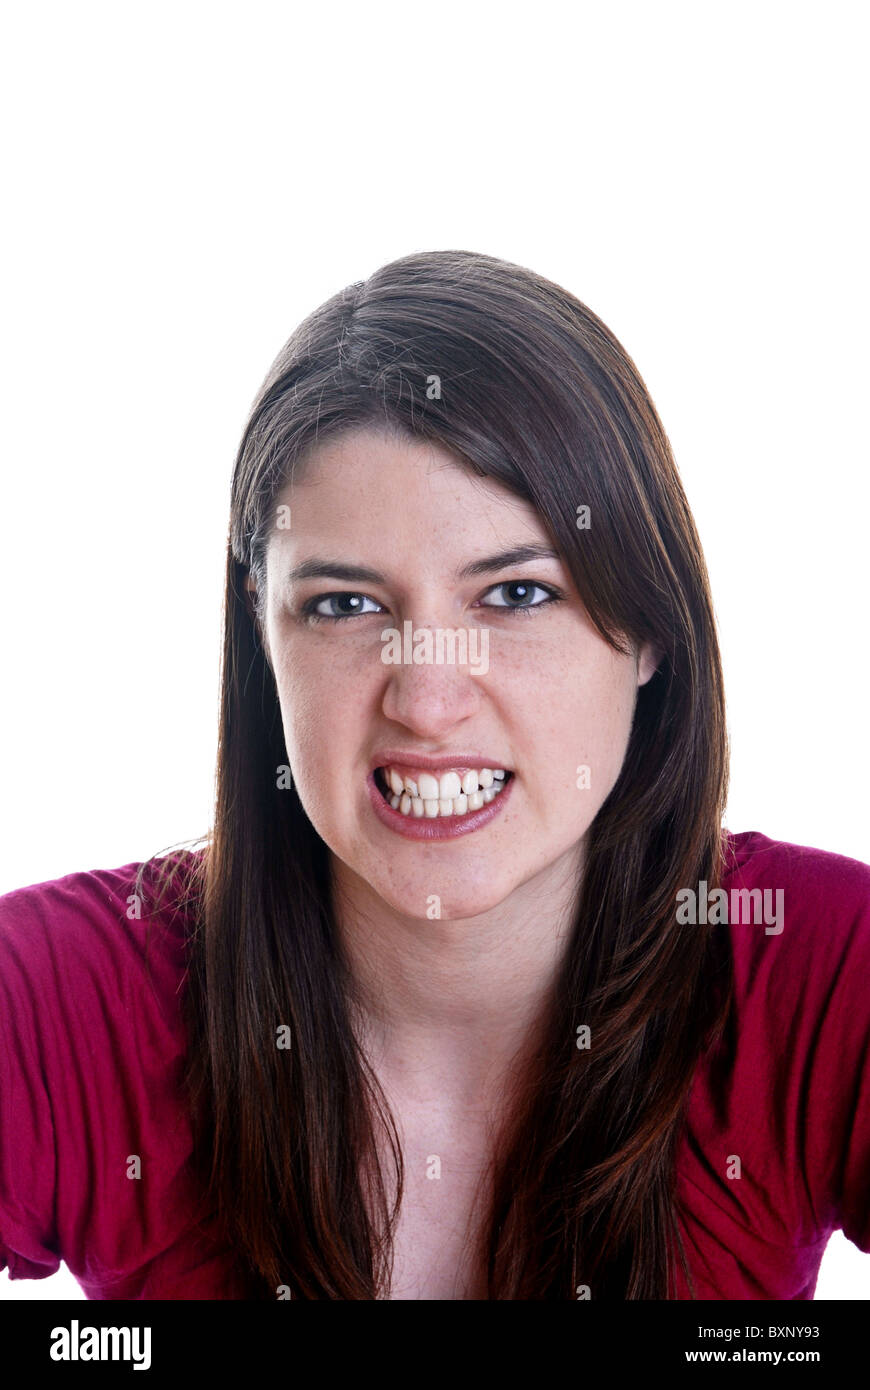 Agressive young woman Stock Photo